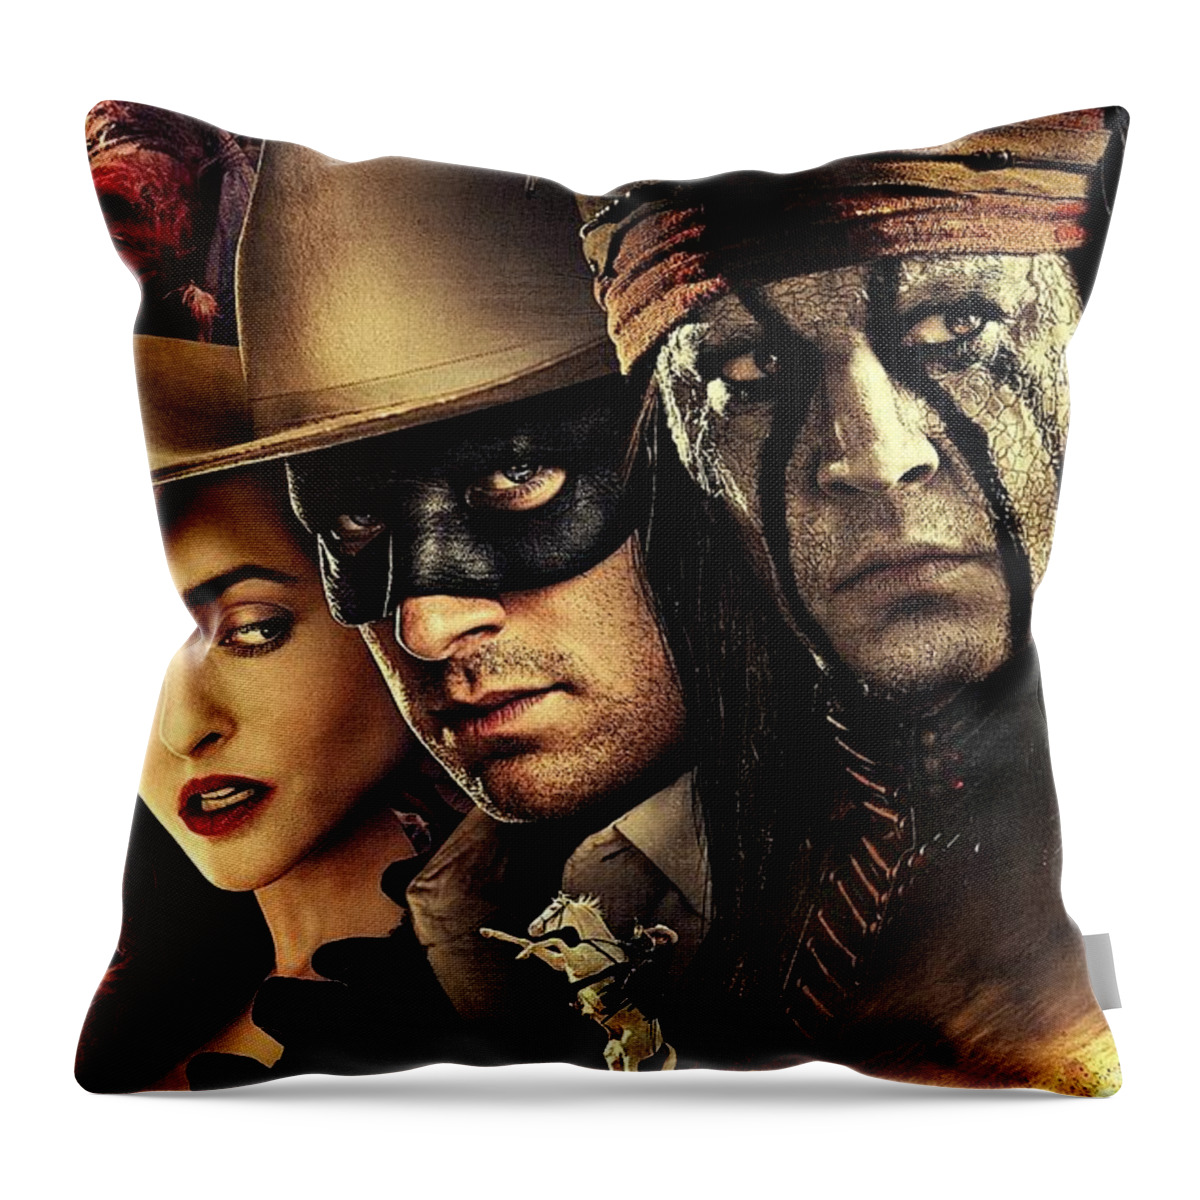 The Lone Ranger Throw Pillow featuring the digital art The Lone Ranger by Movie Poster Prints